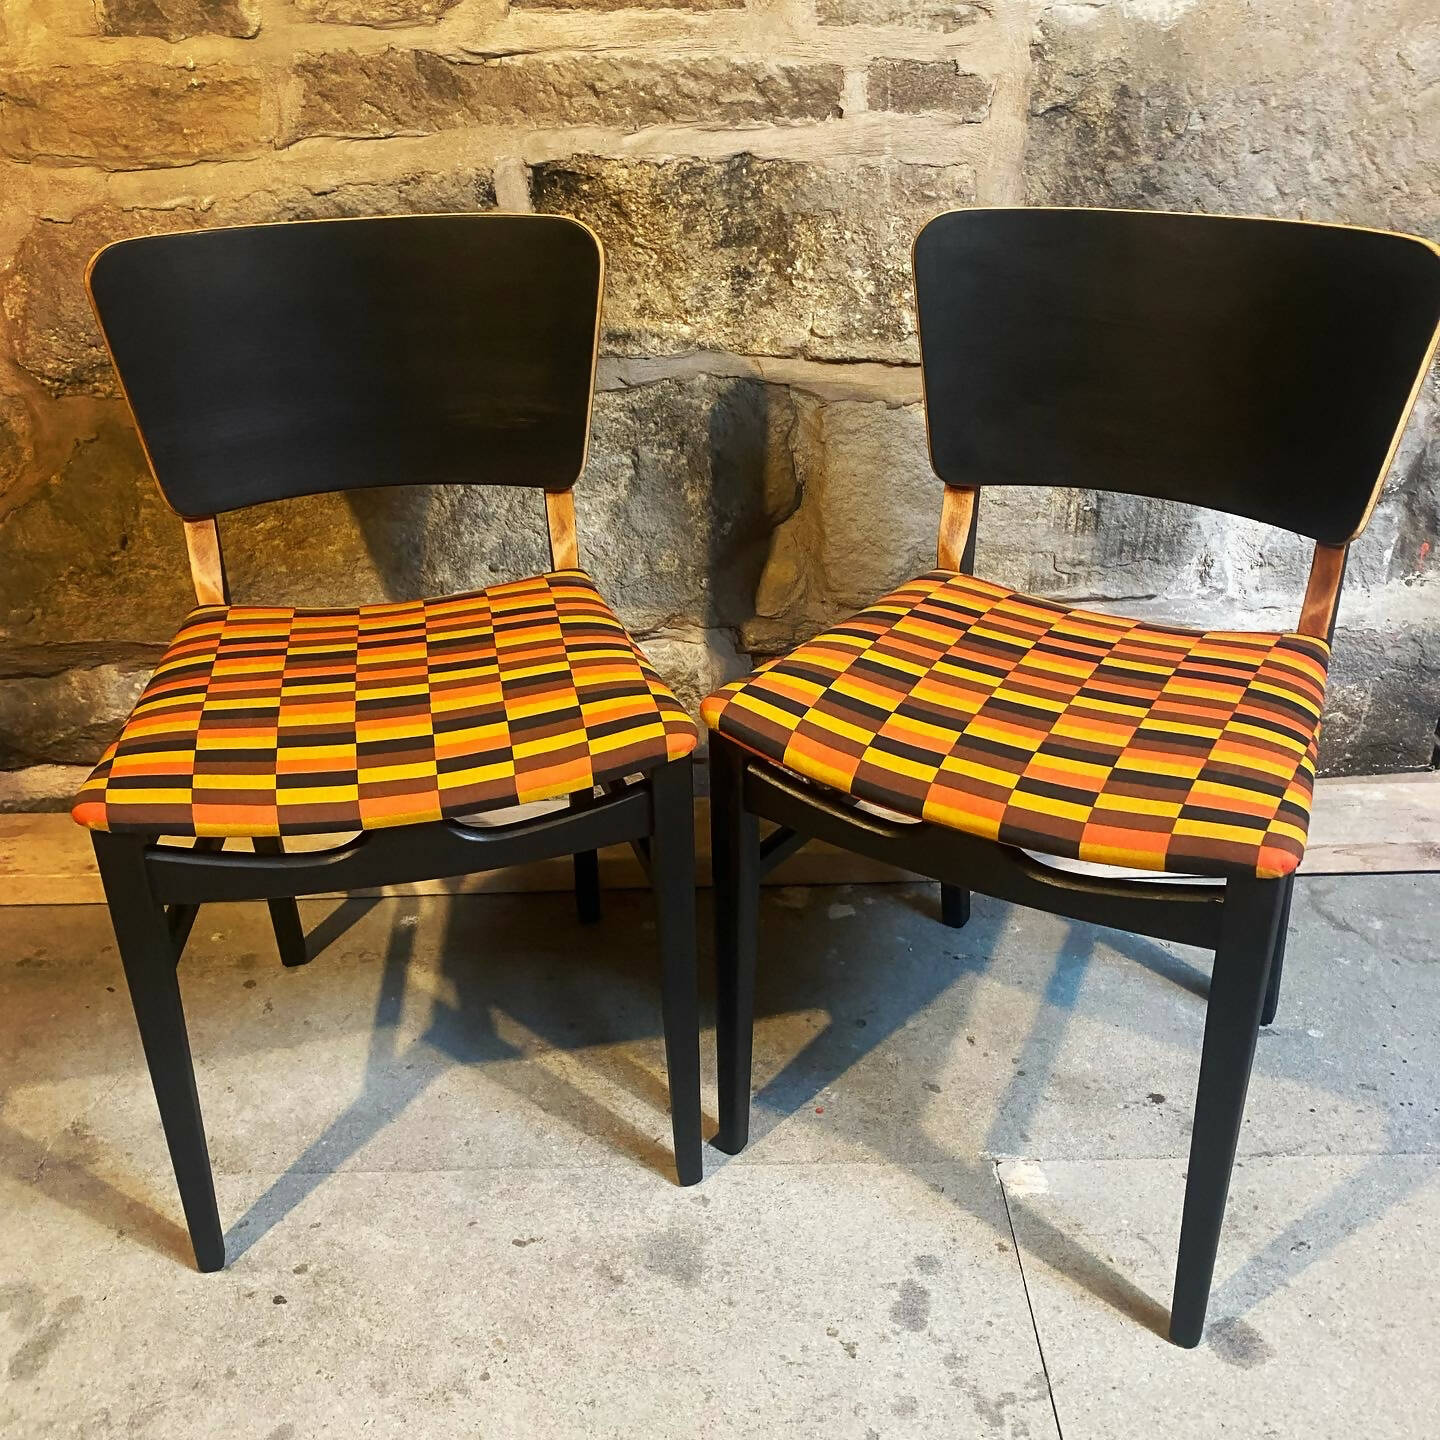 Vintage Beautility Dining Chairs Upholstered In London Transport Fabric